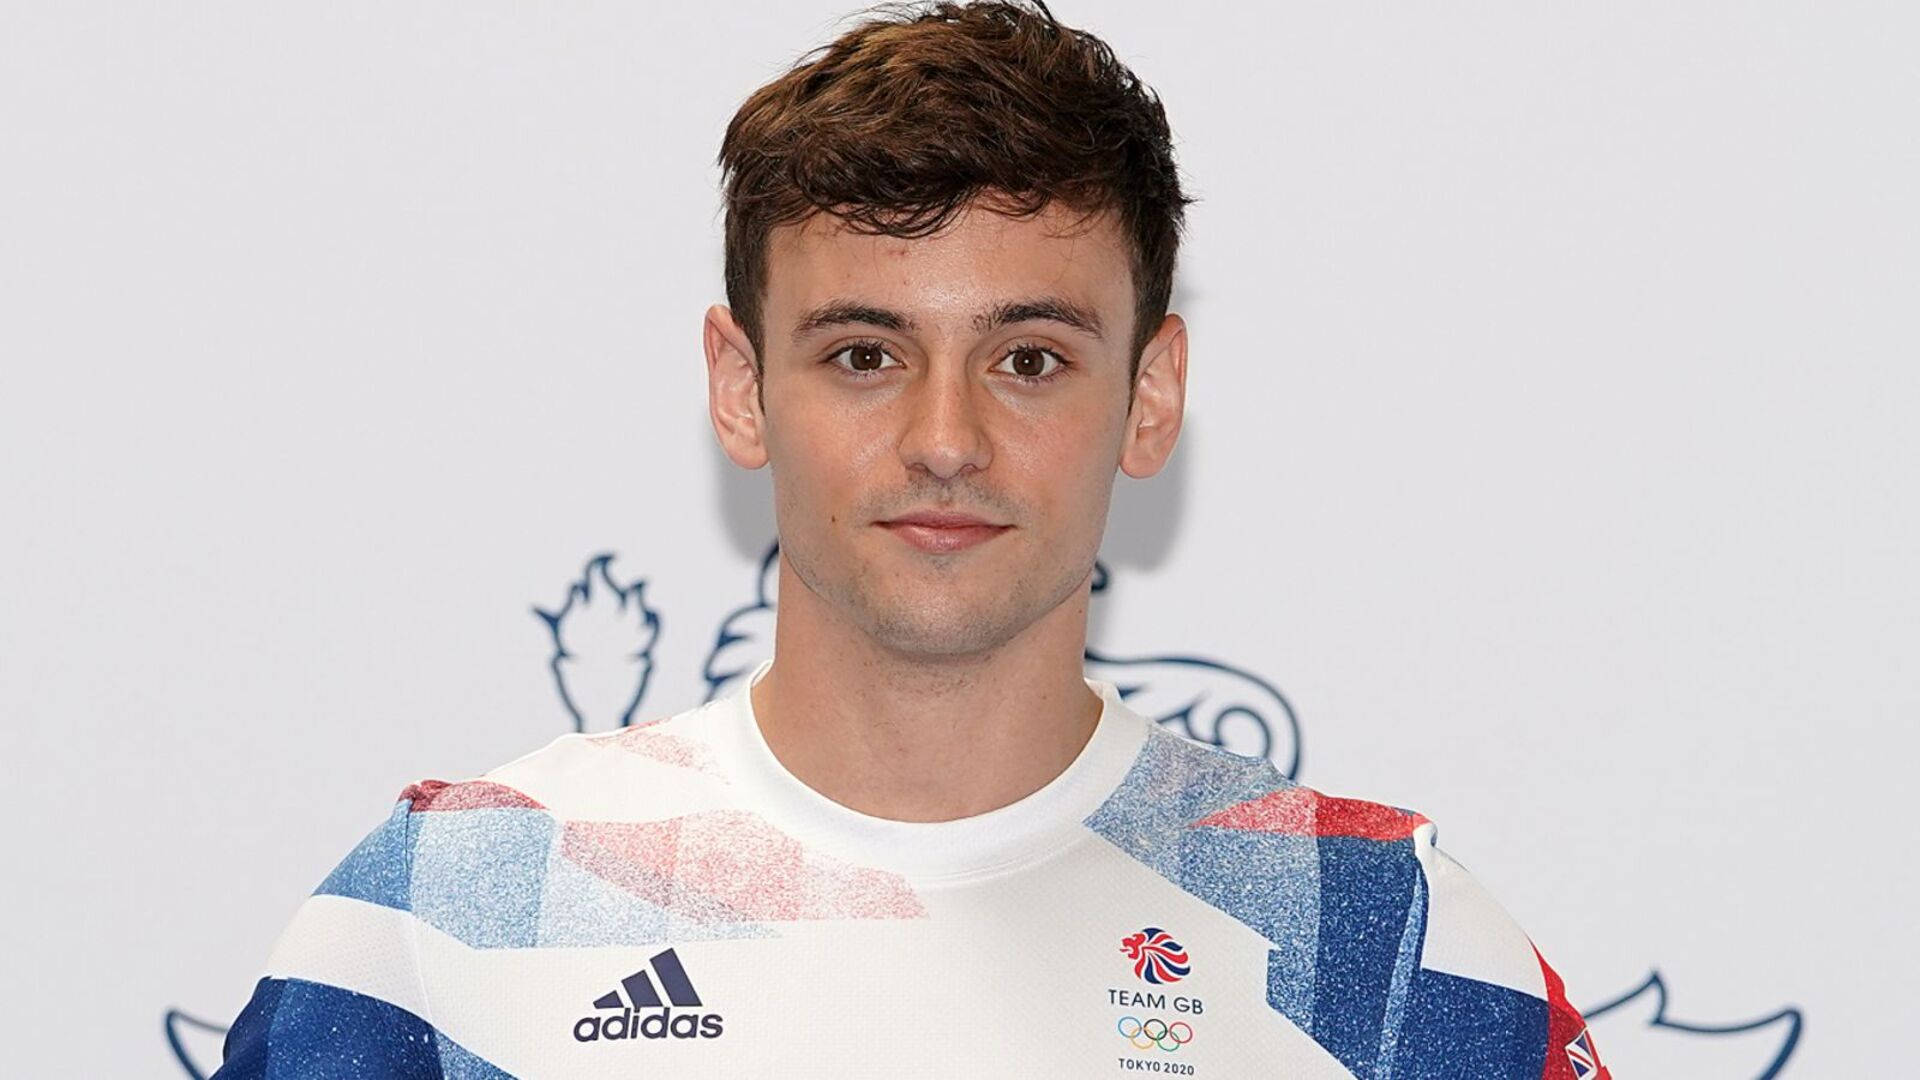 Olympian Diver Tom Daley